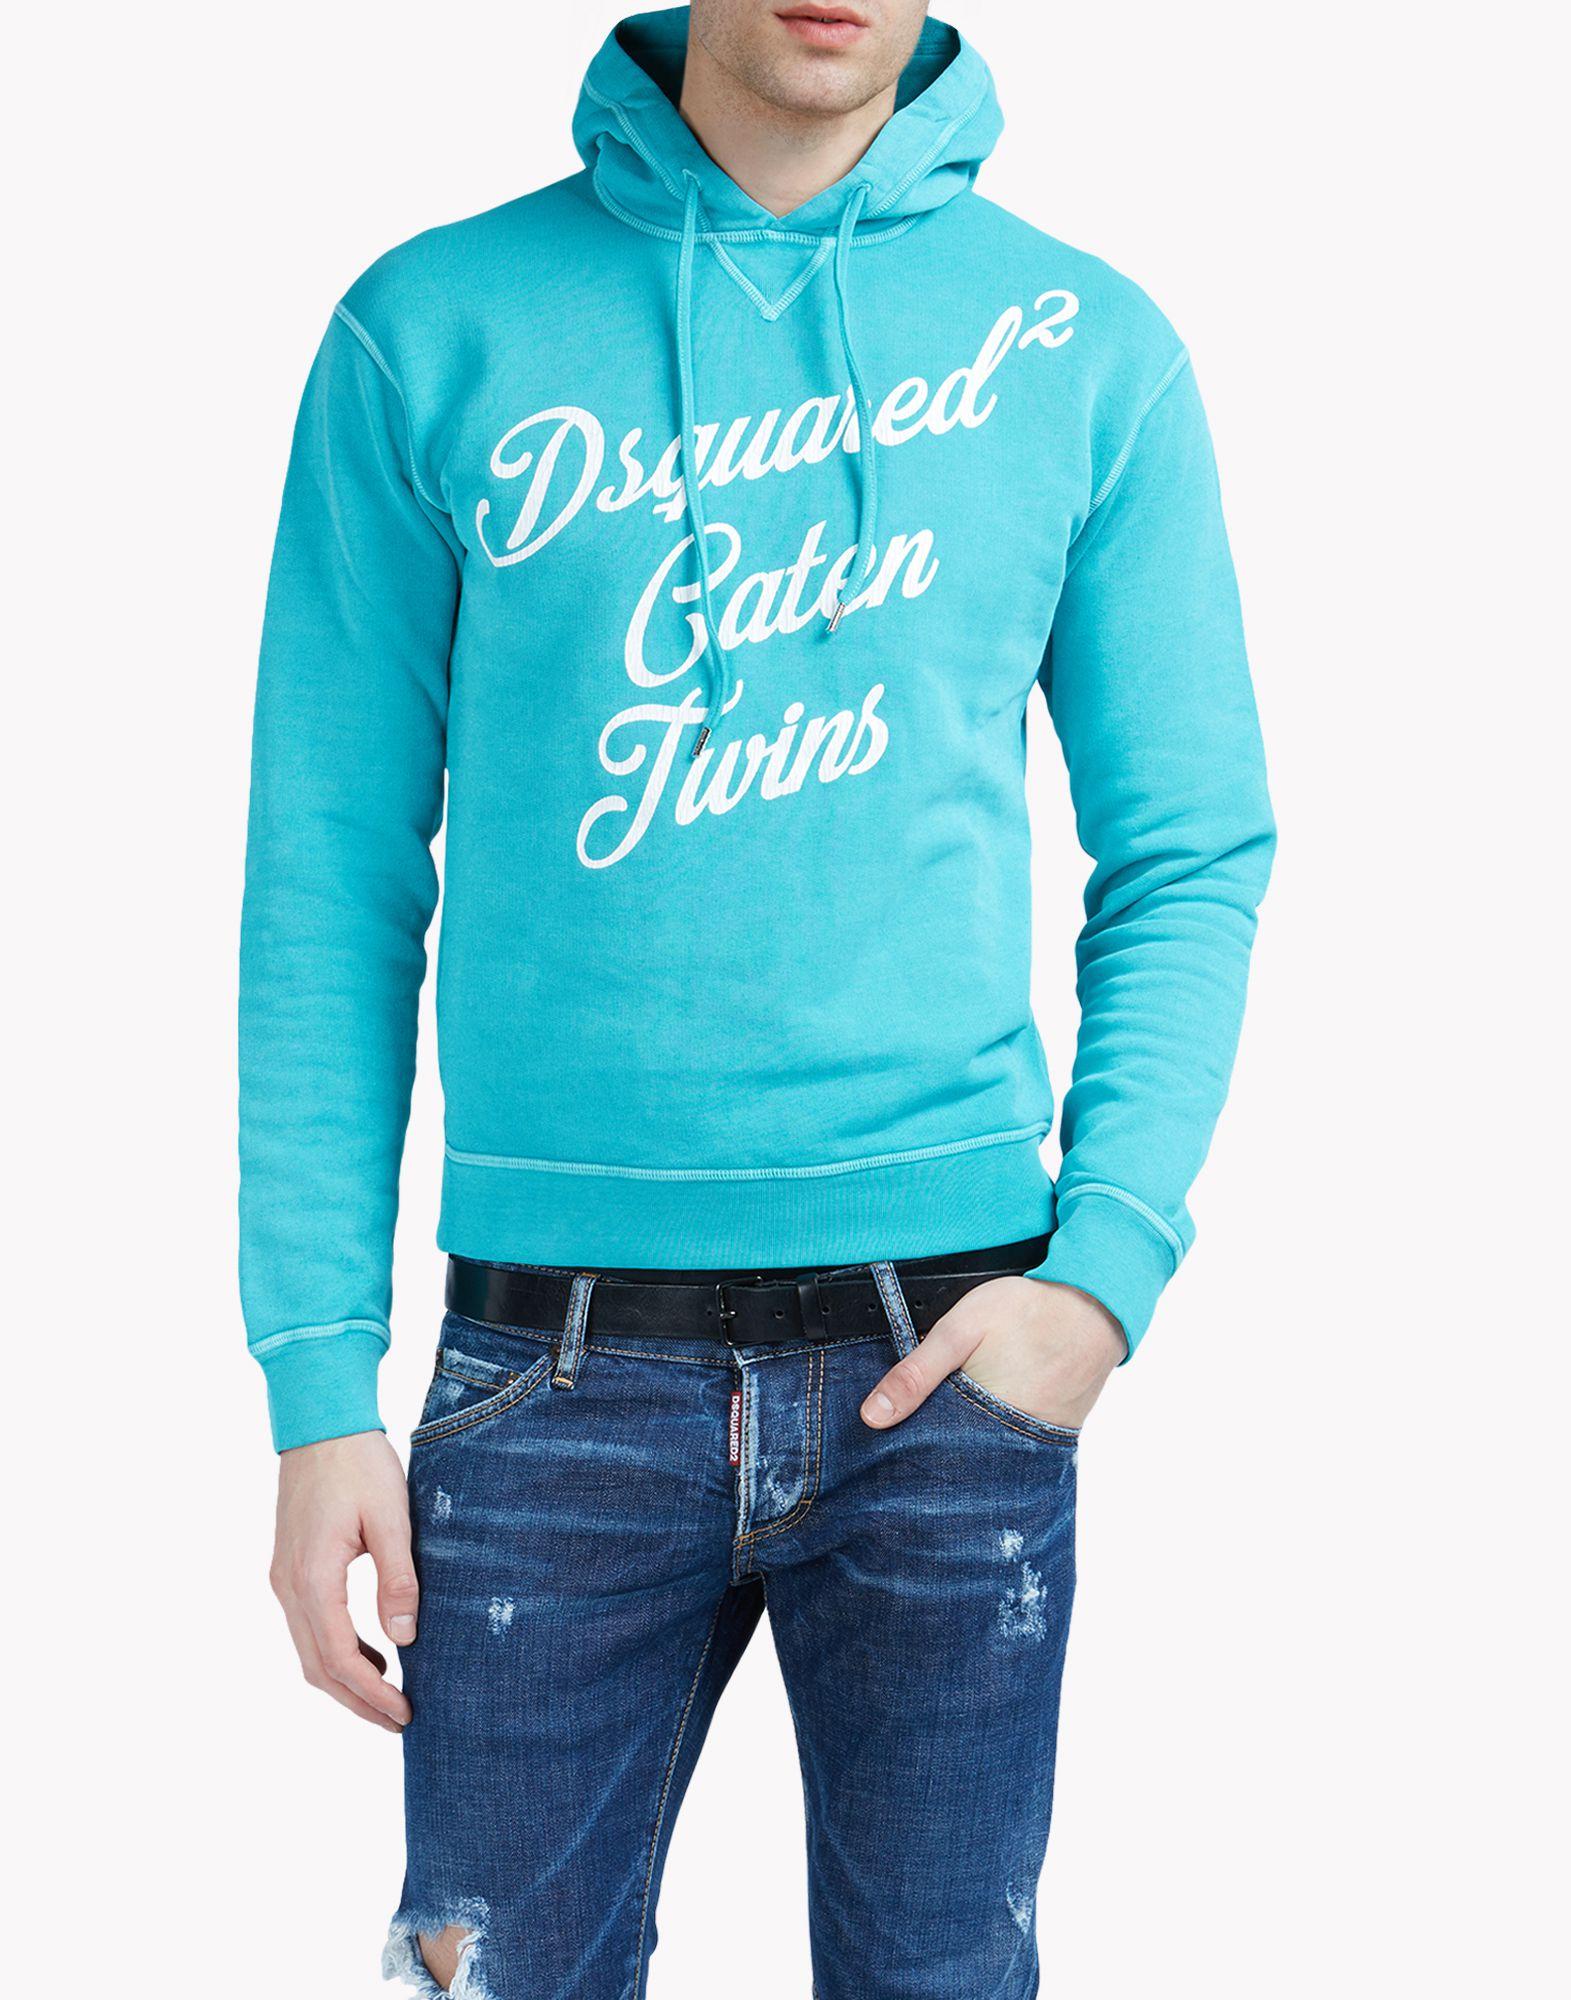 dsquared2 caten twins hoodie